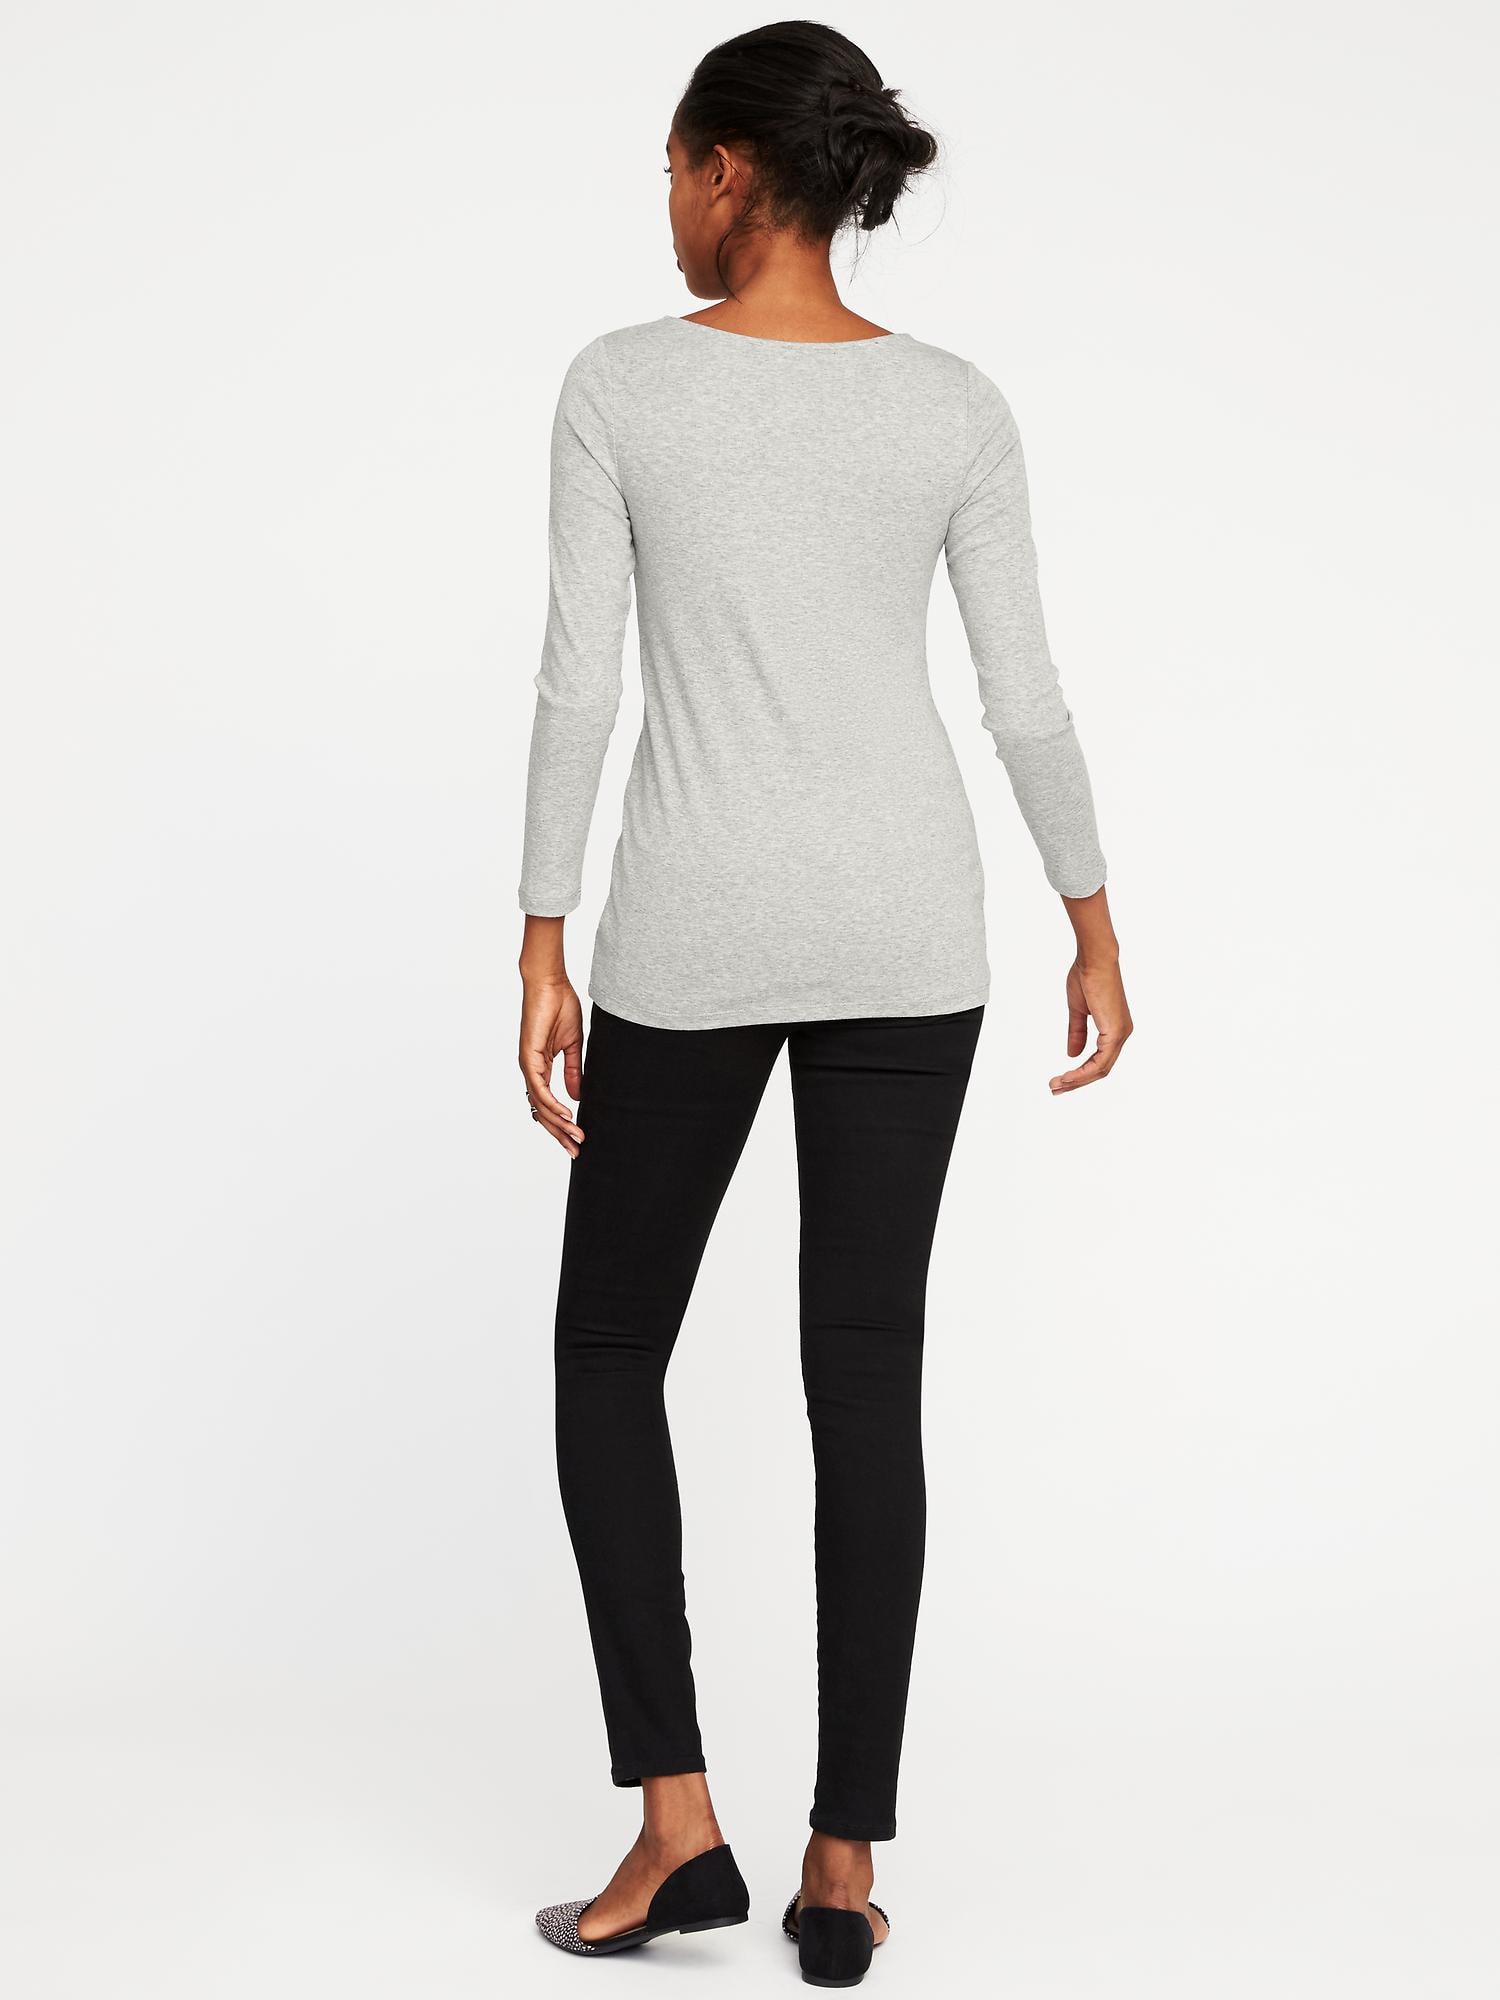 Semi-Fitted Lace-Up Top for Women | Old Navy